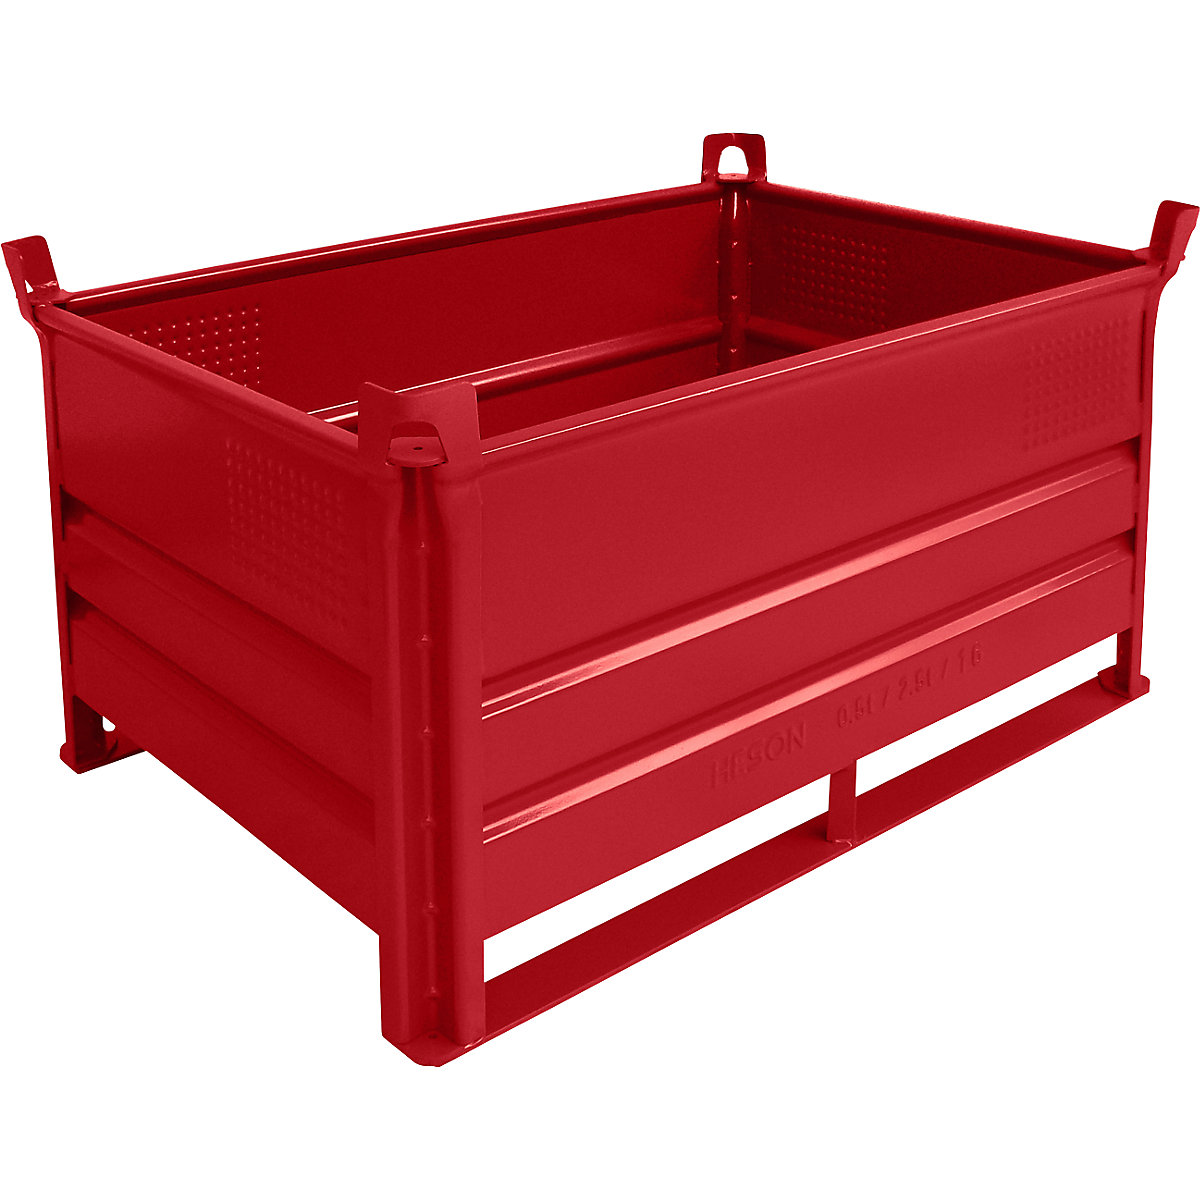 Stacking container with runners – Heson, LxW 1200 x 800 mm, max. load 500 kg, red, 5+ items-4